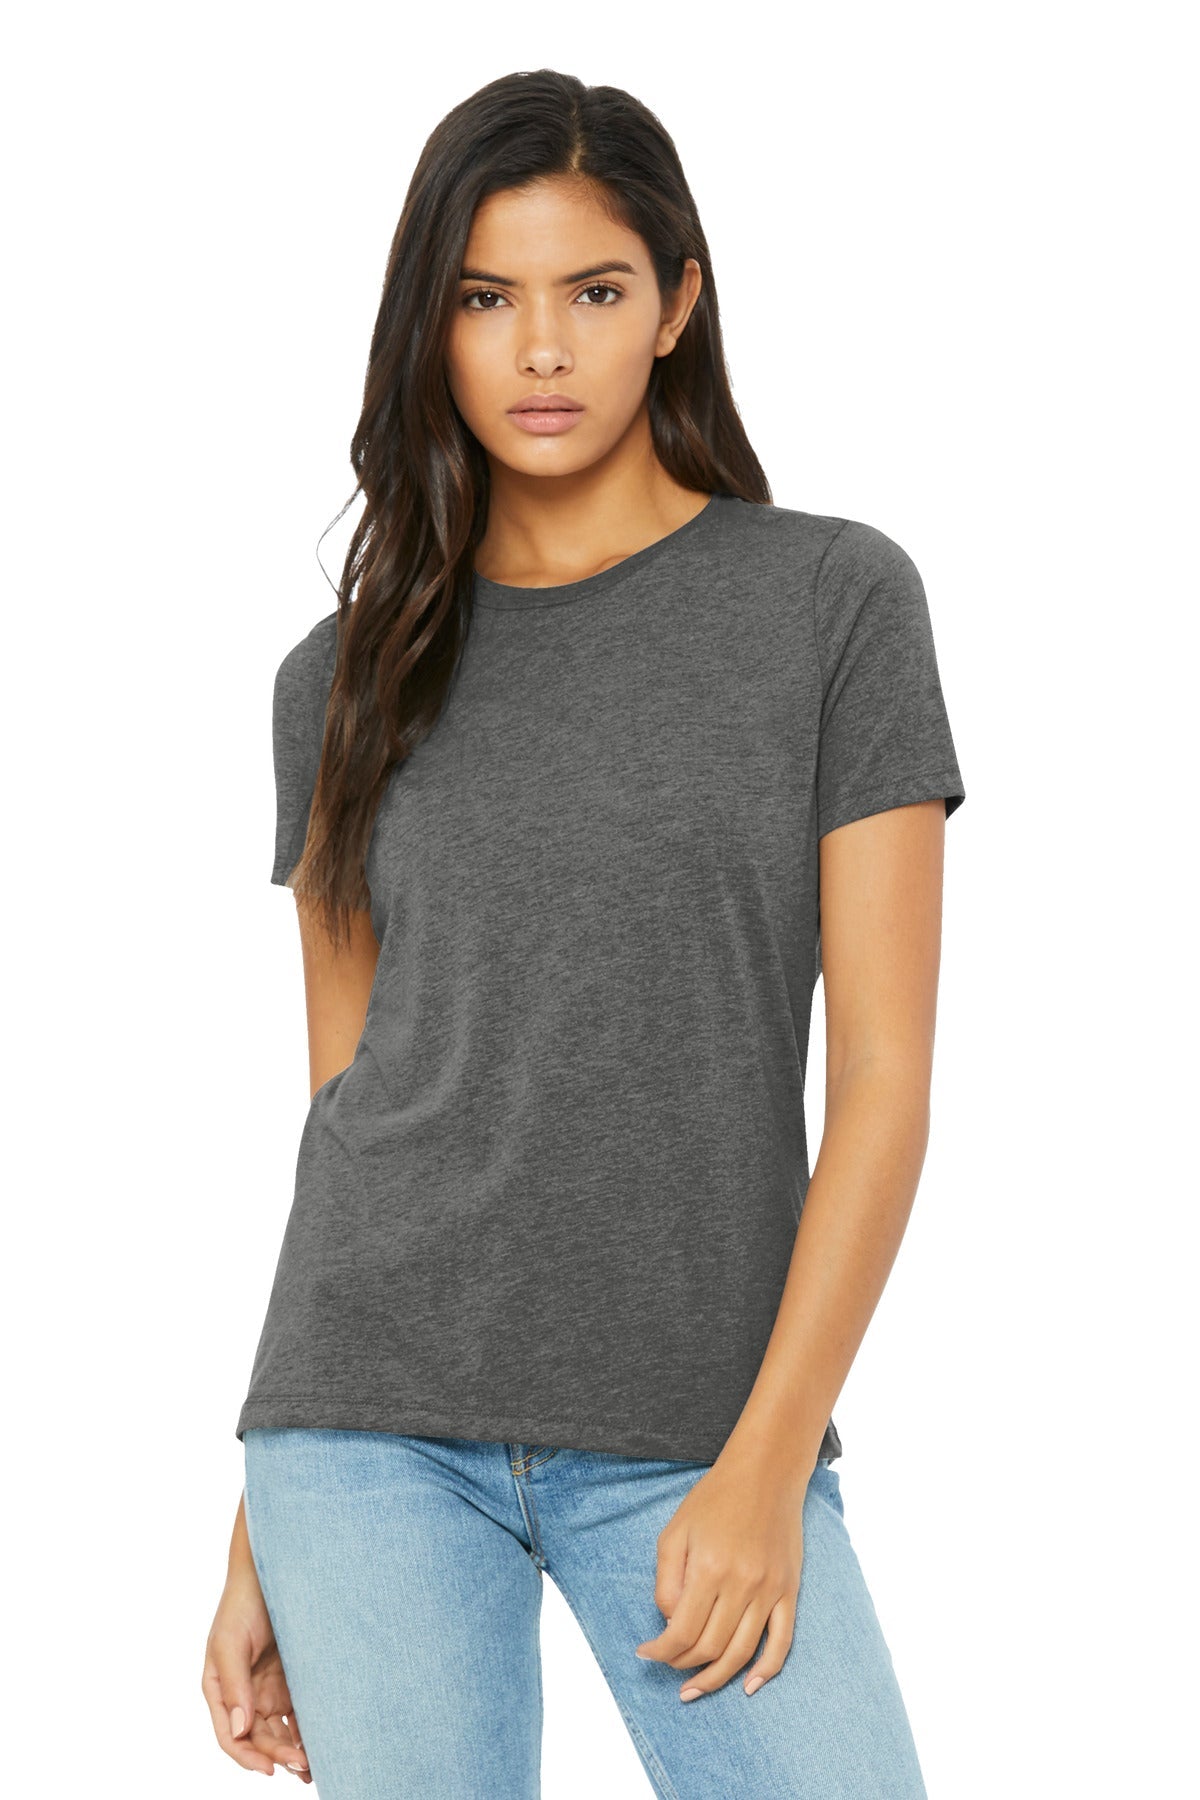 BELLA+CANVAS® Women's Relaxed Triblend Tee BC6413 - DFW Impression